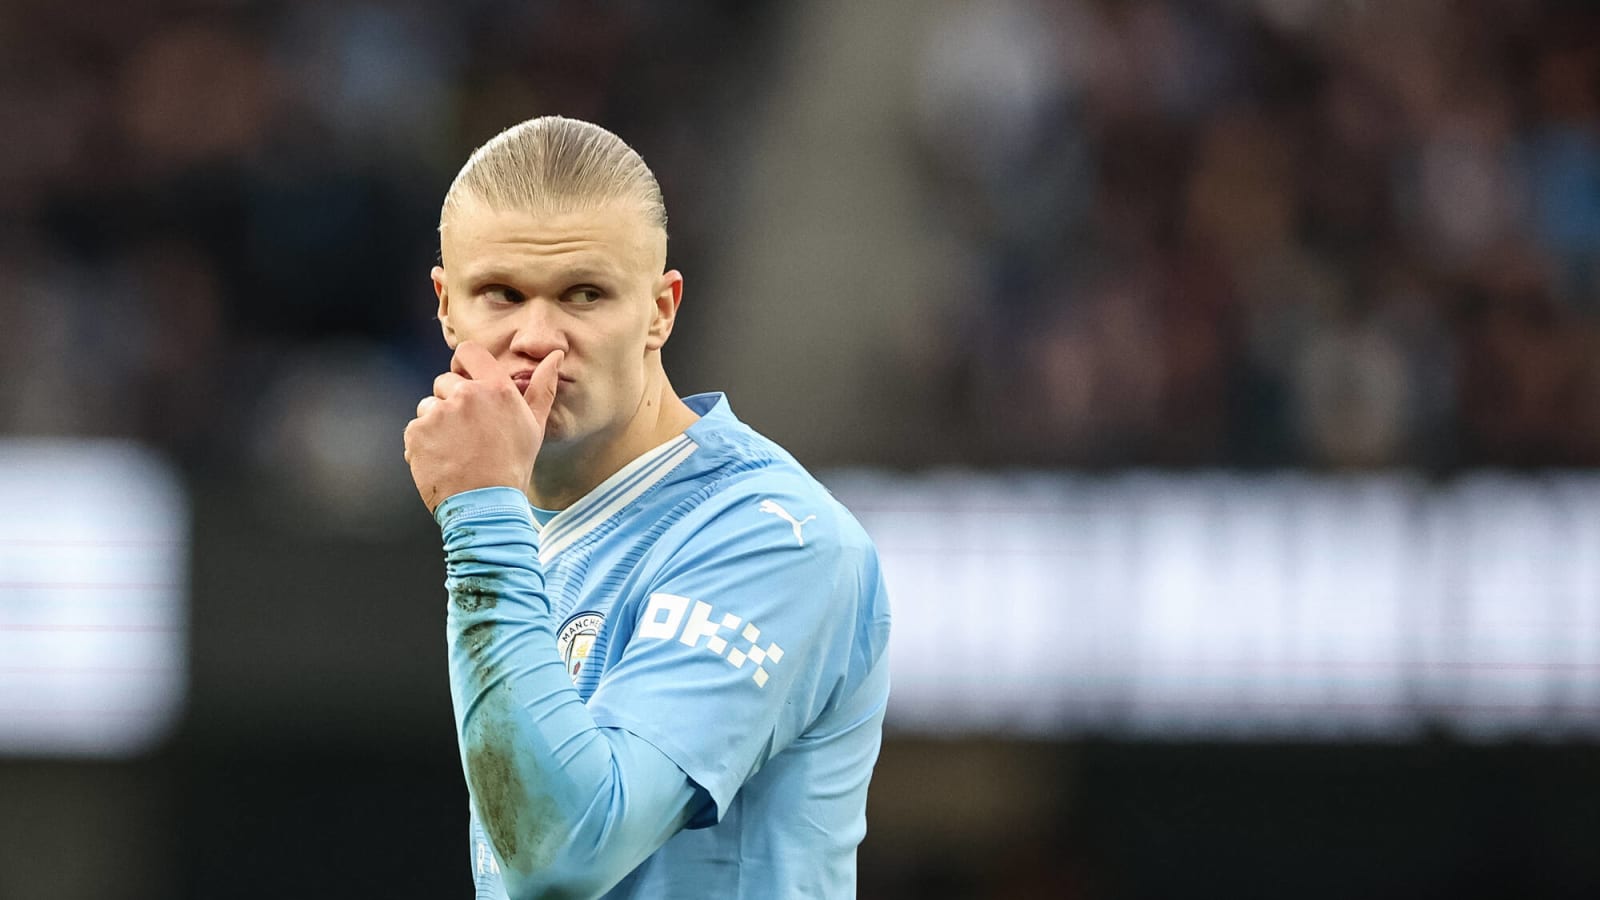 Gary Lineker TRASHES Erling Haaland for missing open goal in Manchester Derby, brands it as ‘worst miss ever’